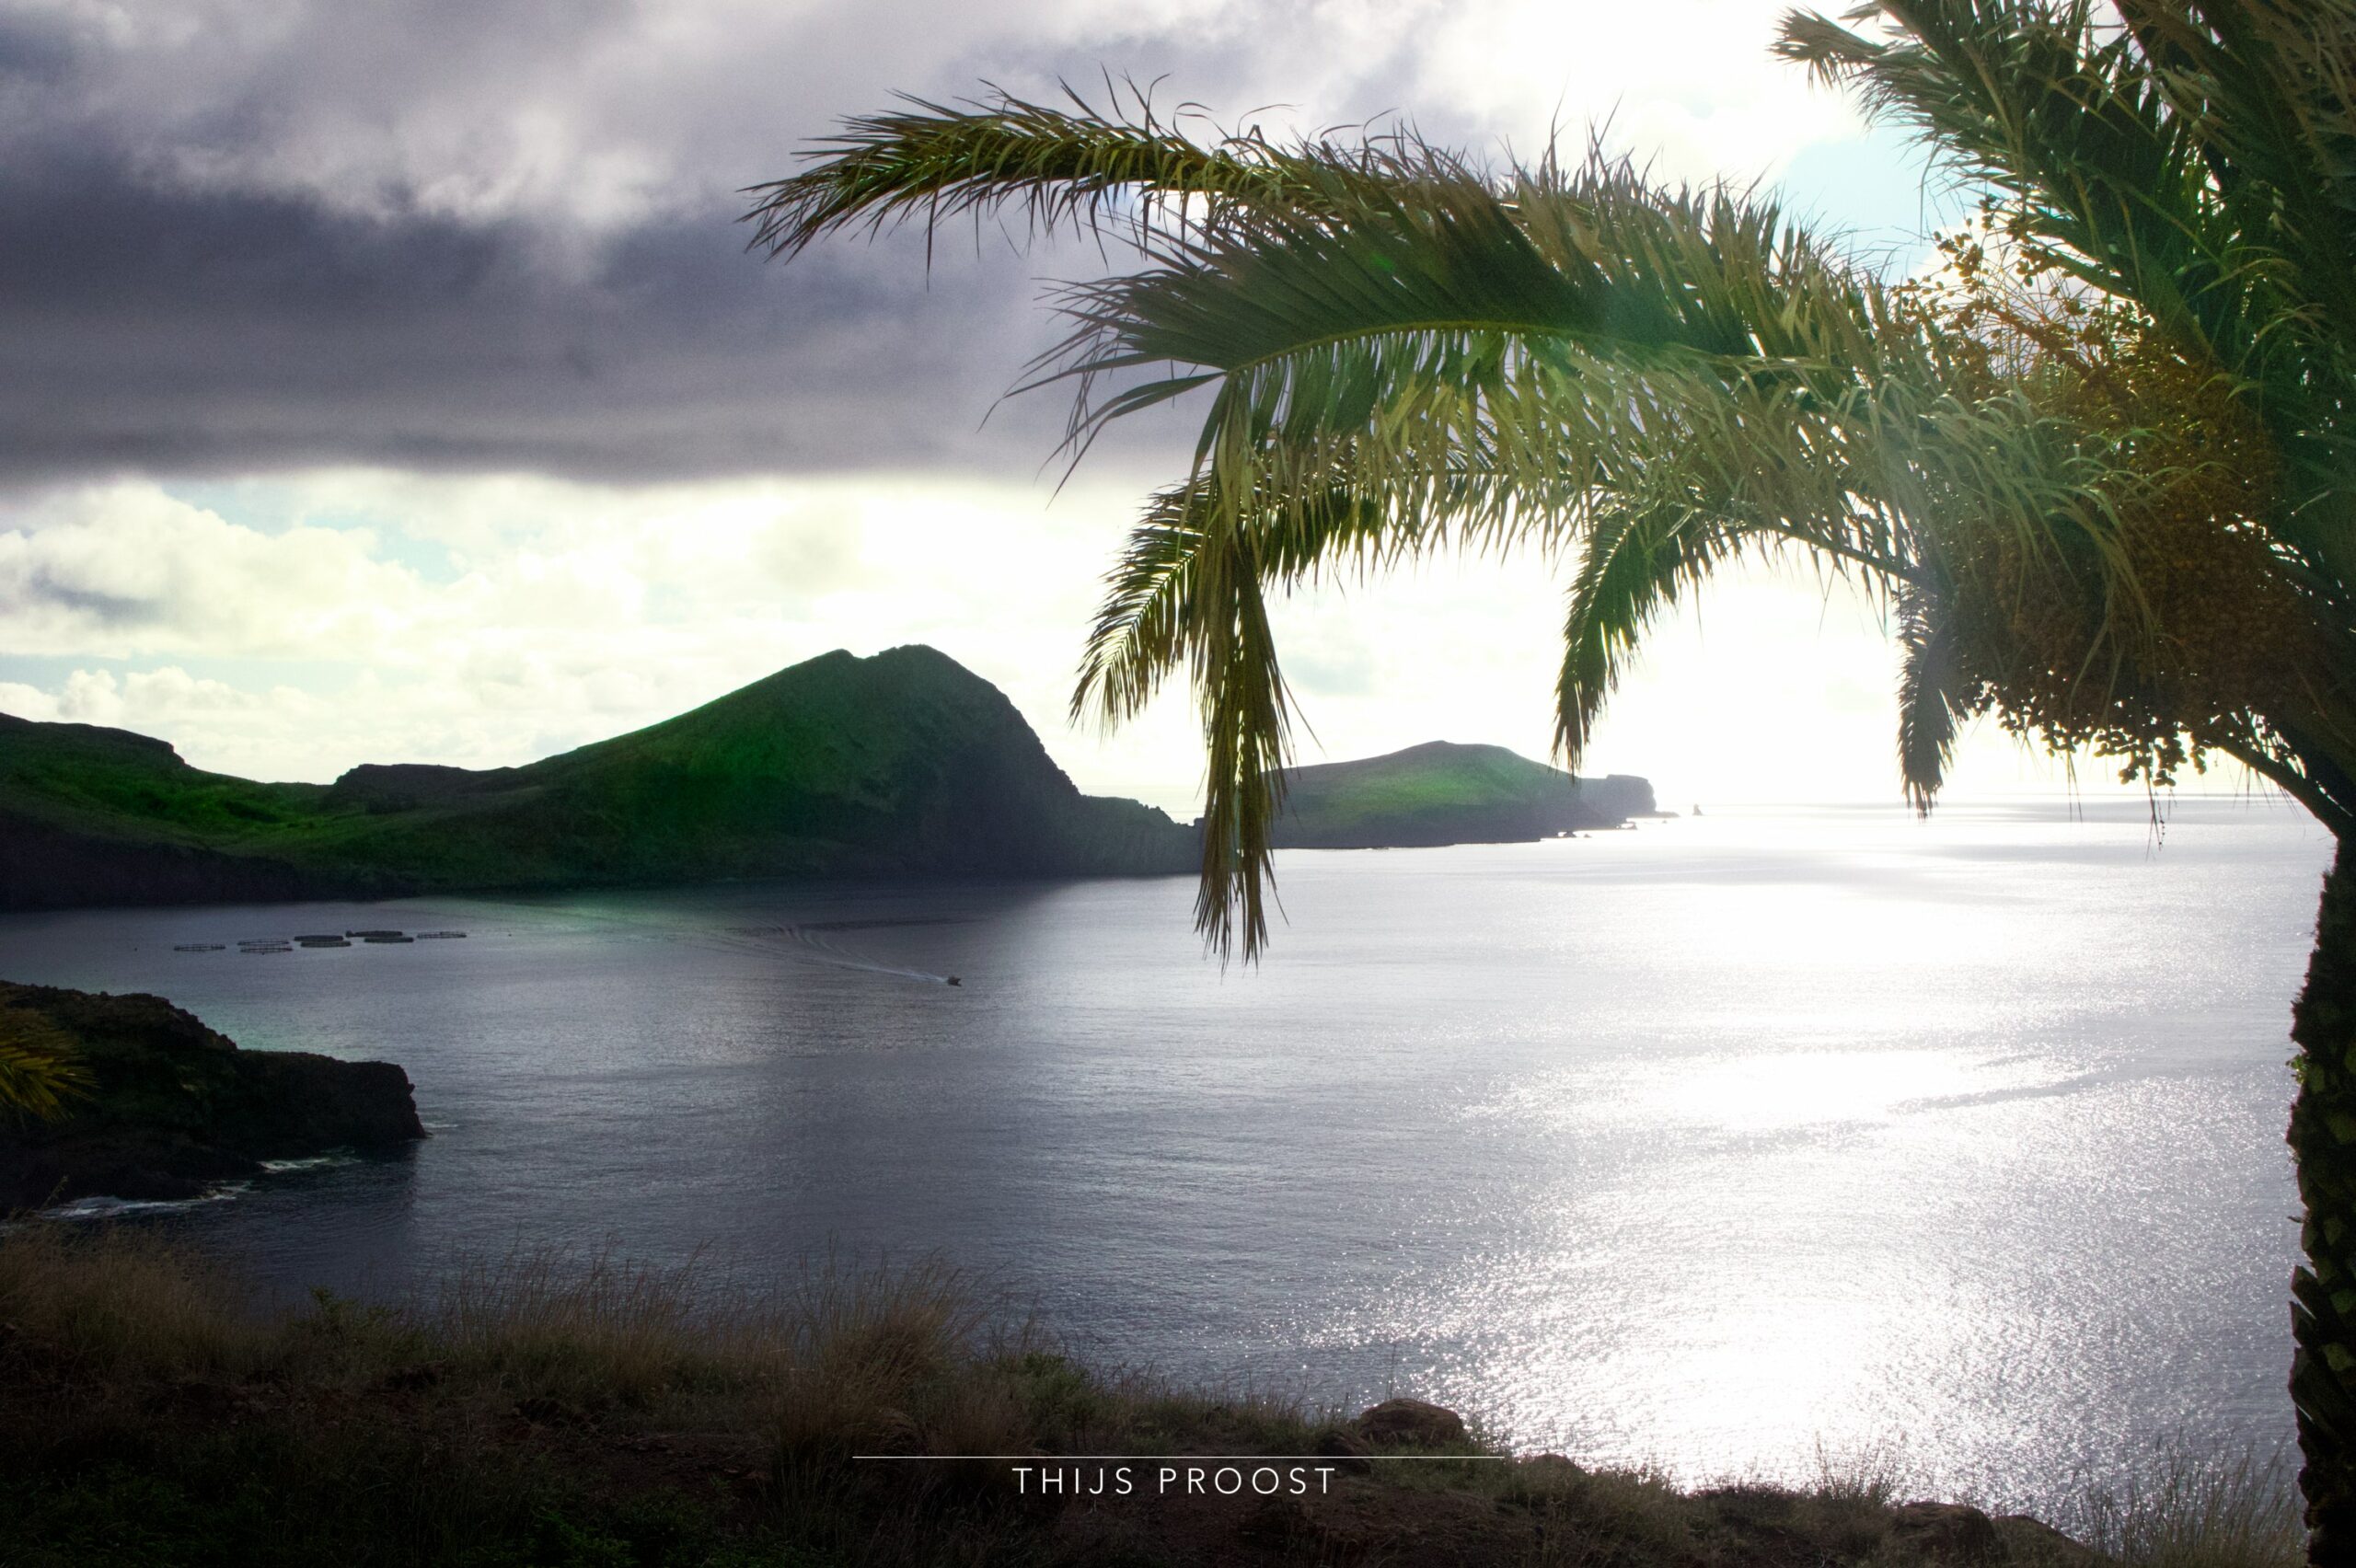 View of Ponta do Sao Lourenco, with a palmtree in front of it.